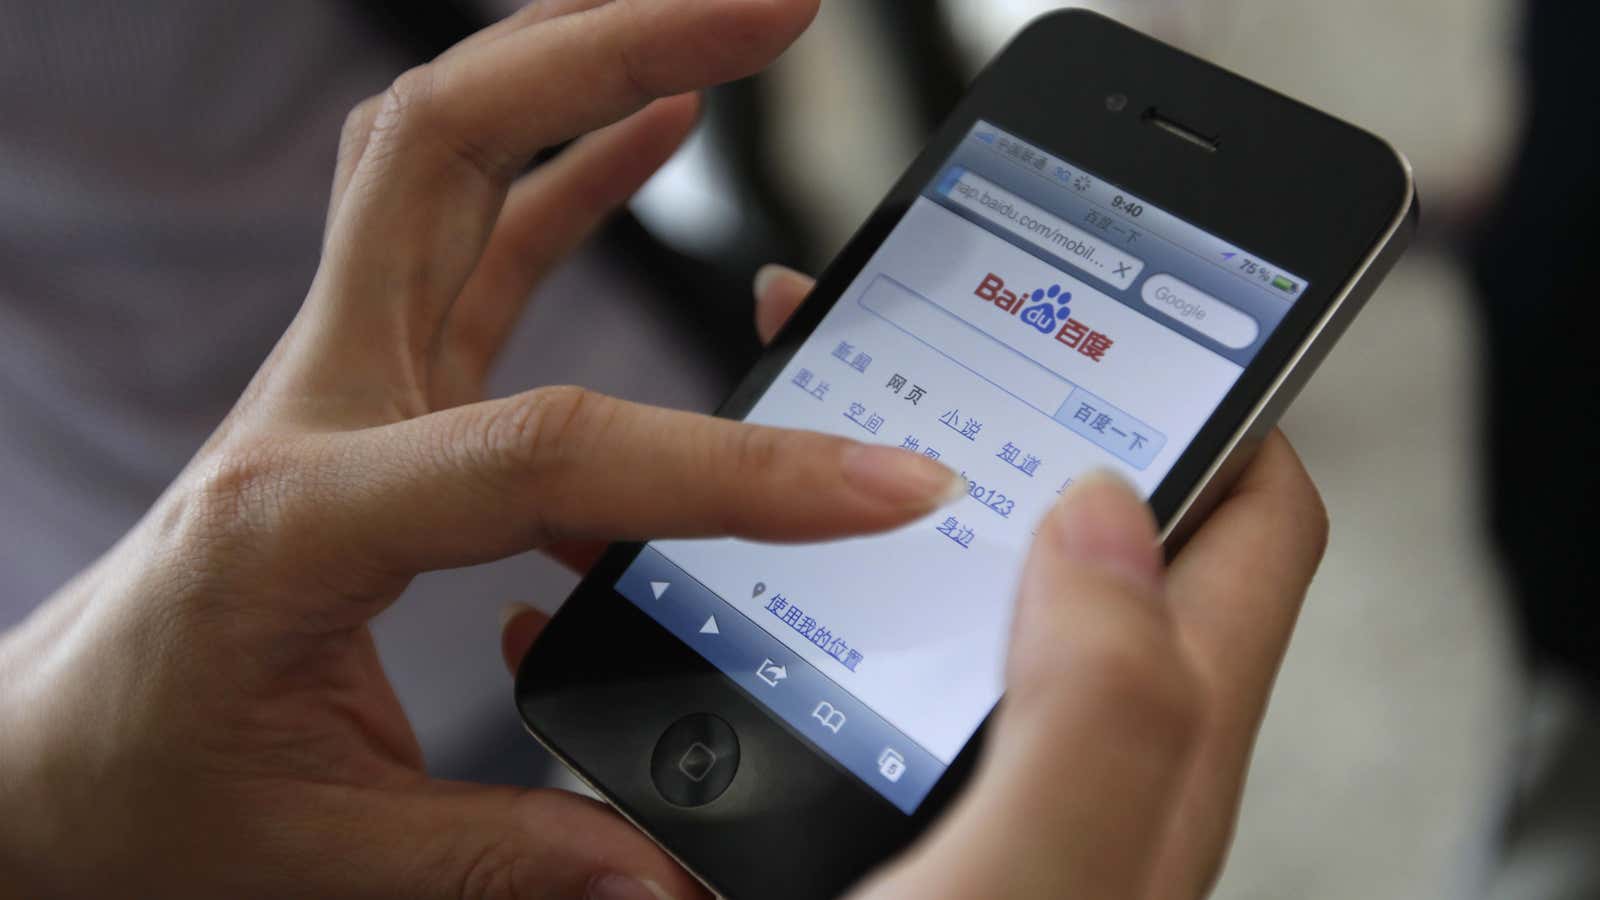 Baidu joins Alibaba and Tencent in peddling online financial services.